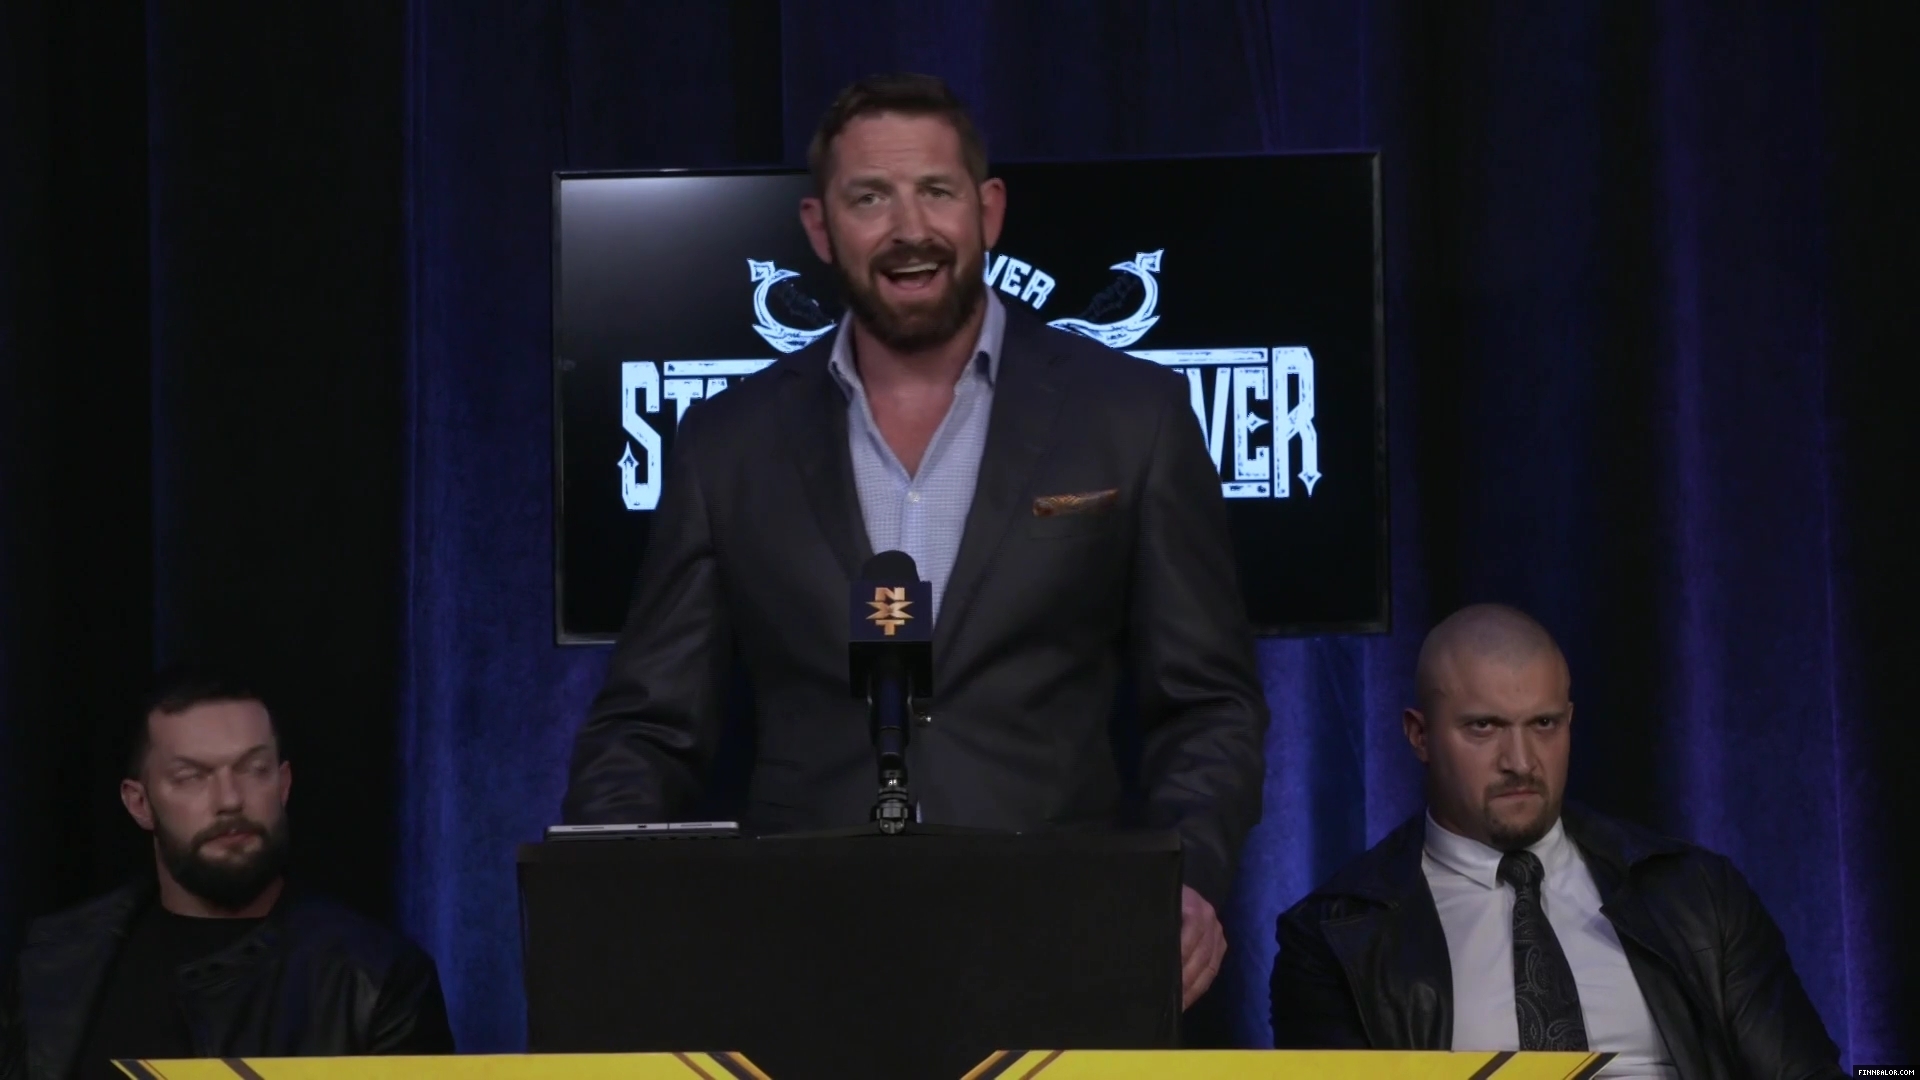 WWE_NXT_TakeOver_Stand_and_Deliver_2021_Global_Press_Conference_1080p_WEB_h264-HEEL_mp42122.jpg